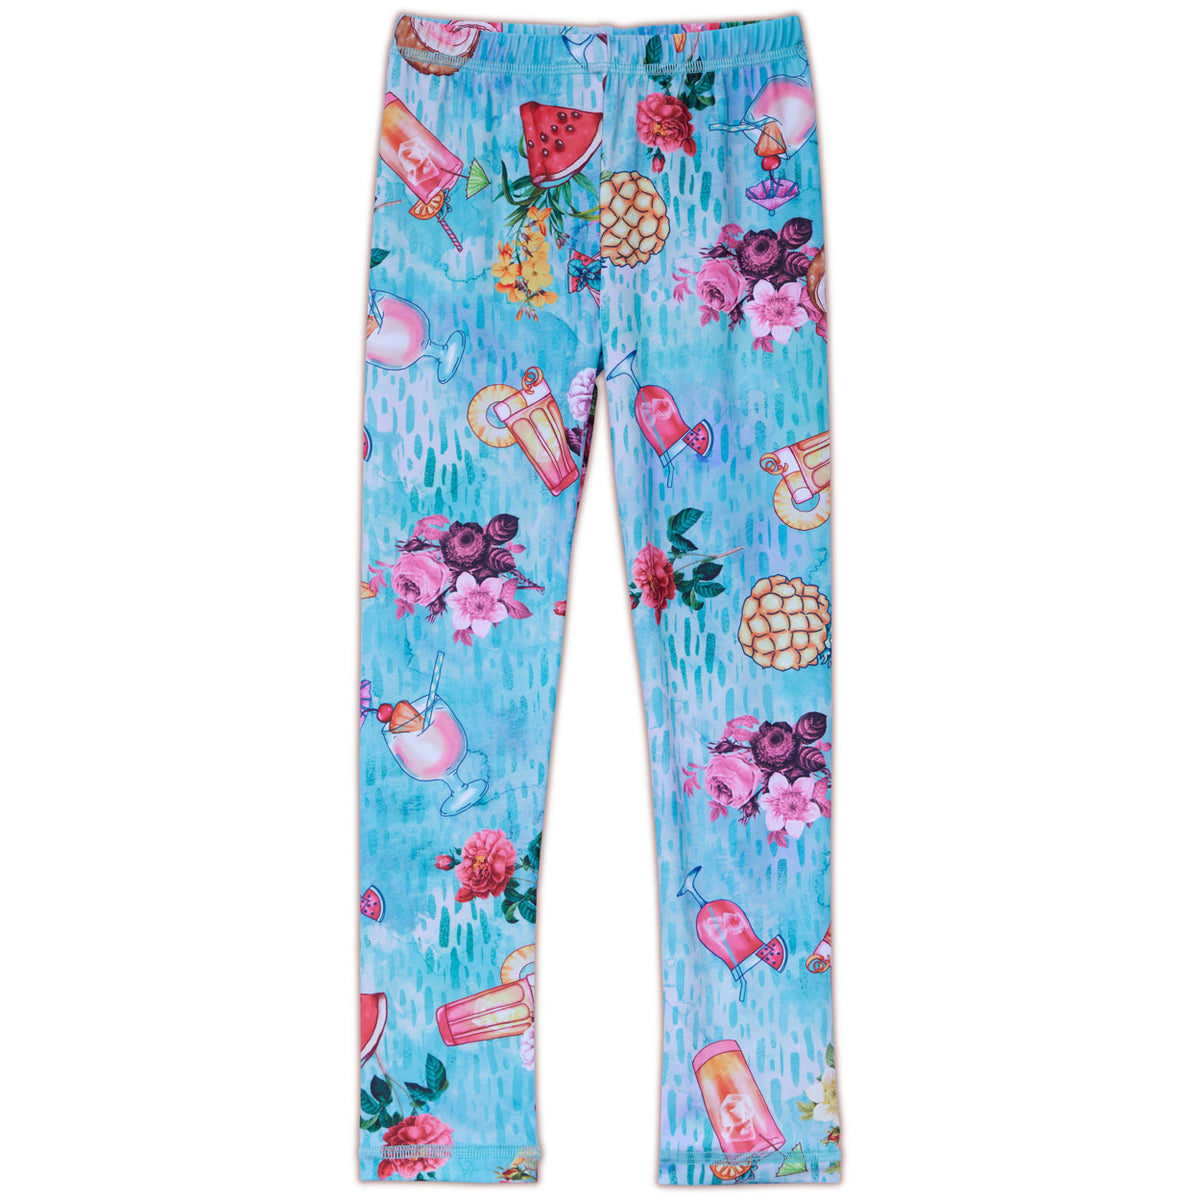 The refreshing summer drinks and retro flowers in colors of the past makes this print kitsch beyond believe. The Kitsch Kids Hybrid Leggings and UPF 50+ swim pants captures the print of the season and the athleisure trend permits her wearing this legging anytime.